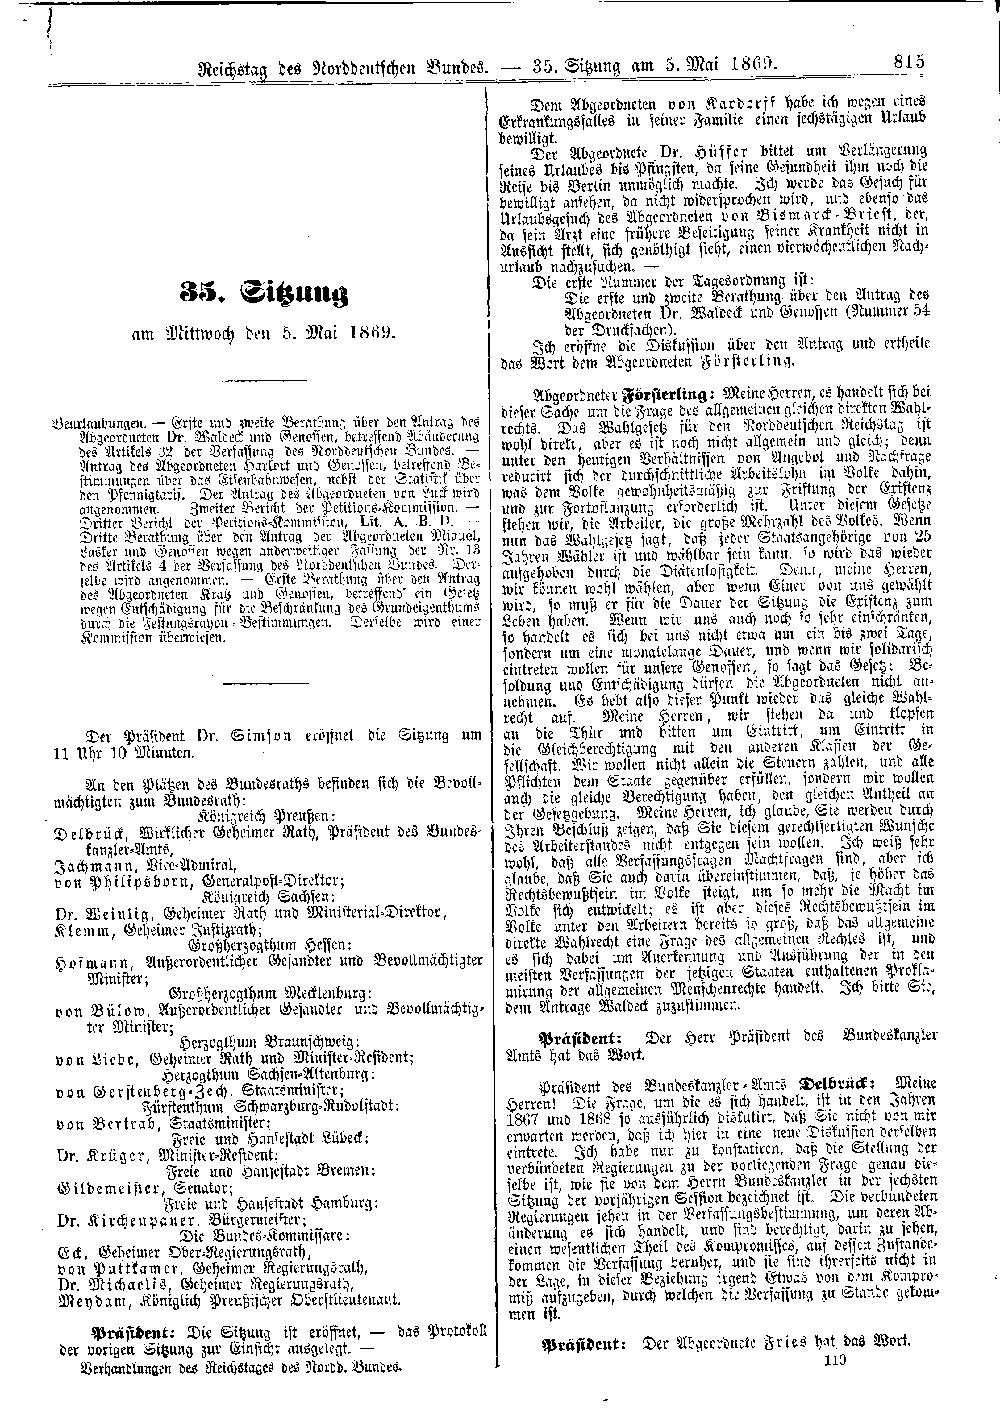 Scan of page 815